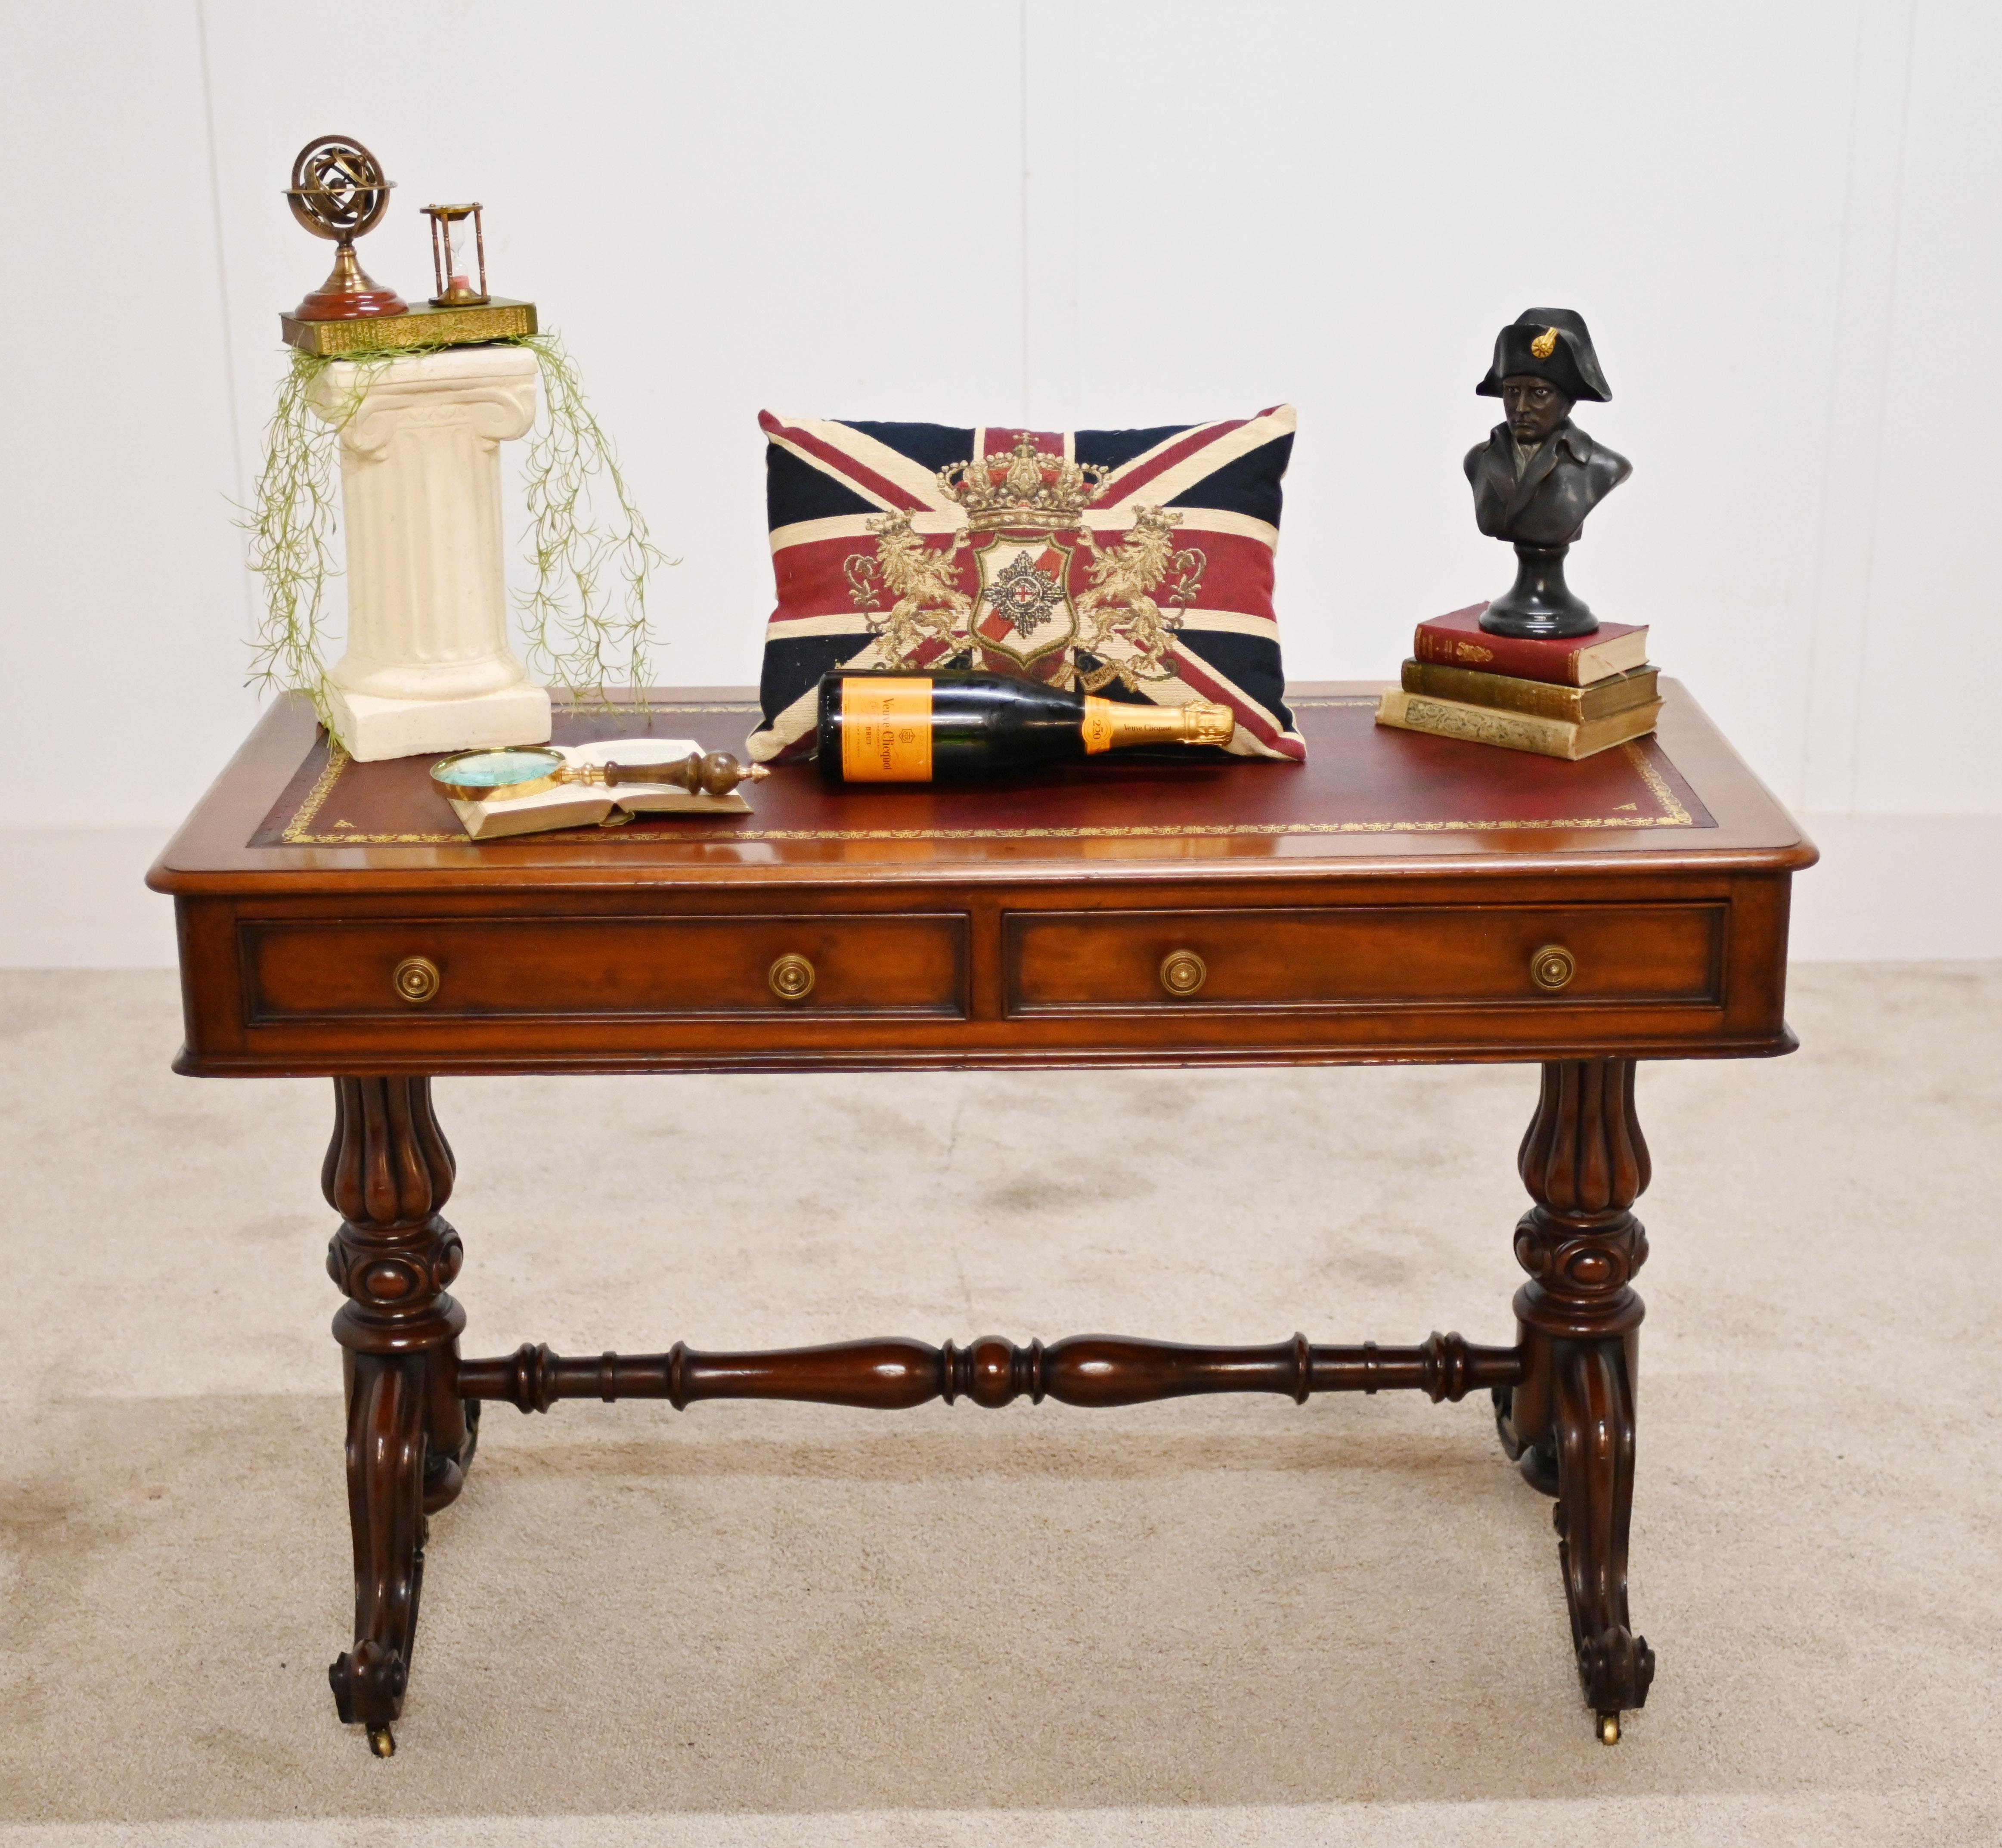 Victorian mahogany desk free standing on a stretcher base
Carved from mahogany with brass pull handles and a burgundy leather top with gold tooling
Circa 1880
Lovingly restored so in great condition, perfect for a stylish home office set up
Offered